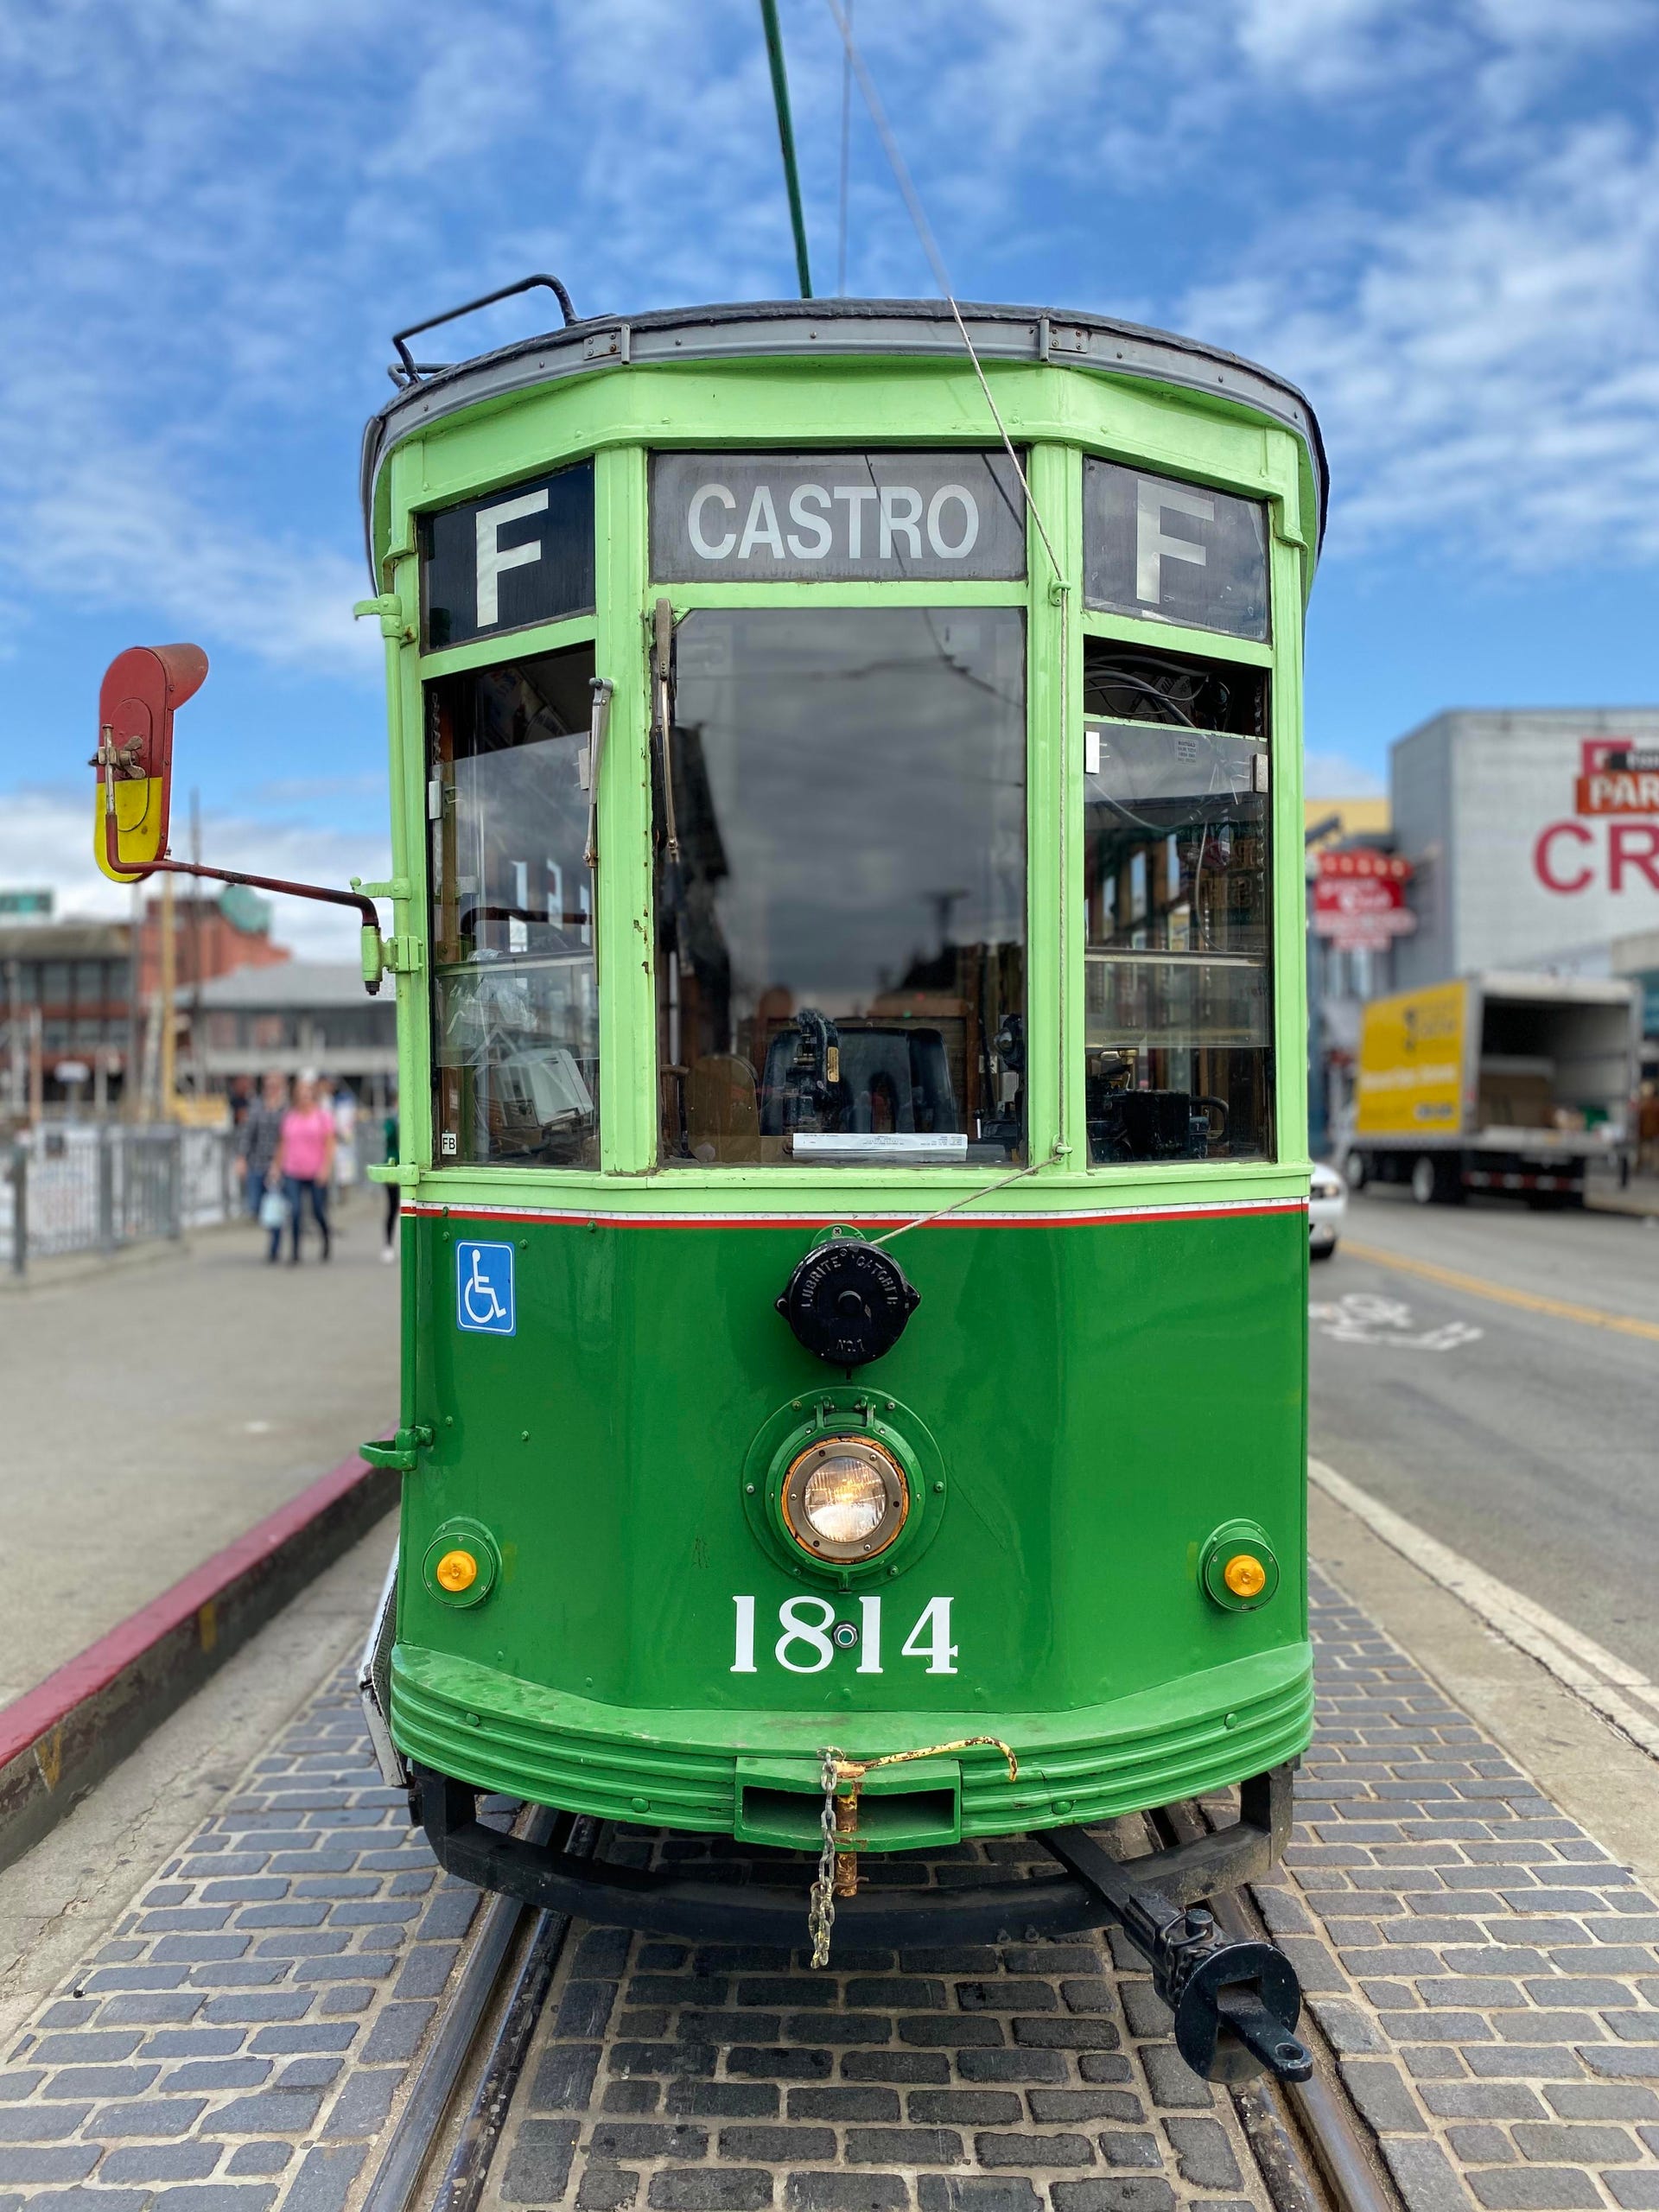 San Francisco's F Castro streetcar shot with the 'Ultra Wide' lens with Portrait Mode Studio Light effect.